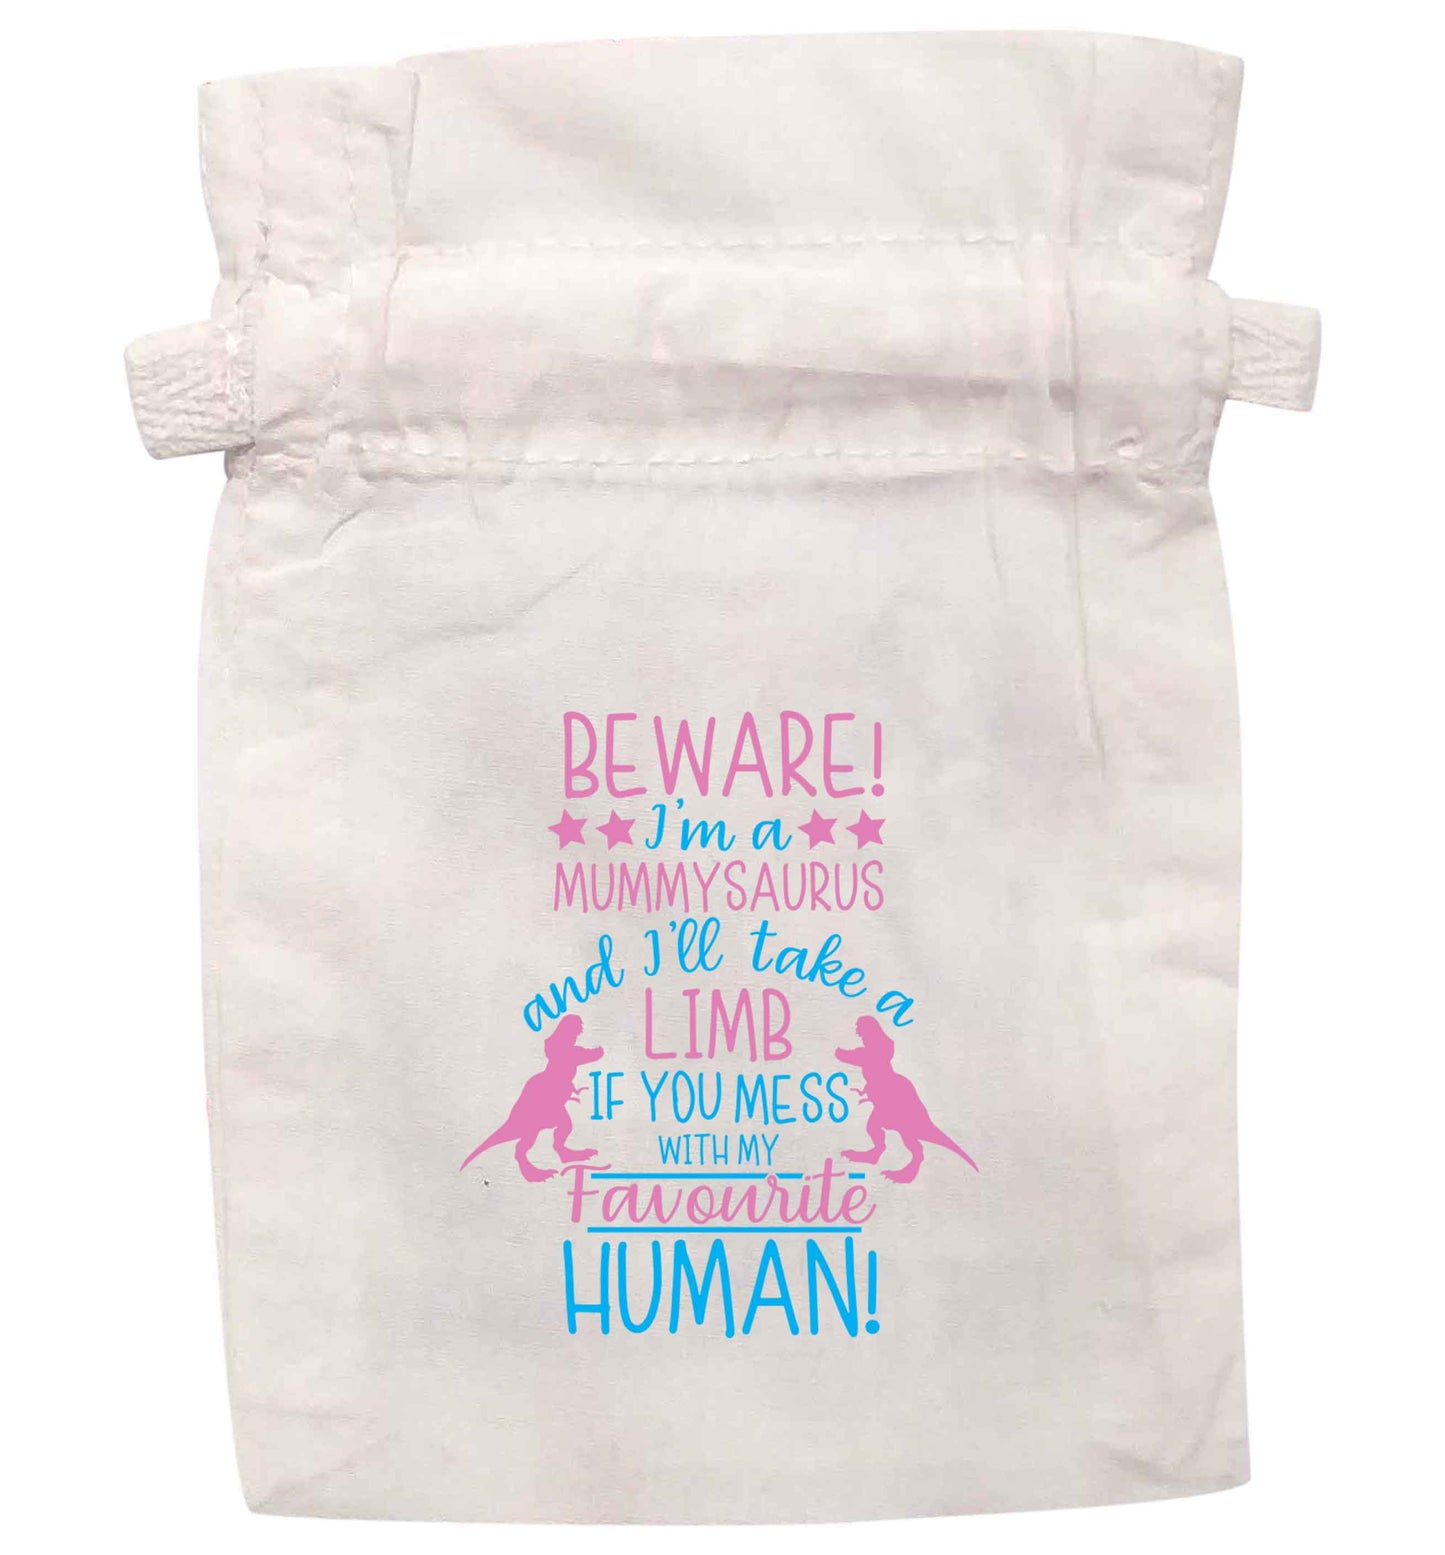 Beware I'm a mummysaurus and I'll take a limb if you mess with my favourite human | XS - L | Pouch / Drawstring bag / Sack | Organic Cotton | Bulk discounts available!